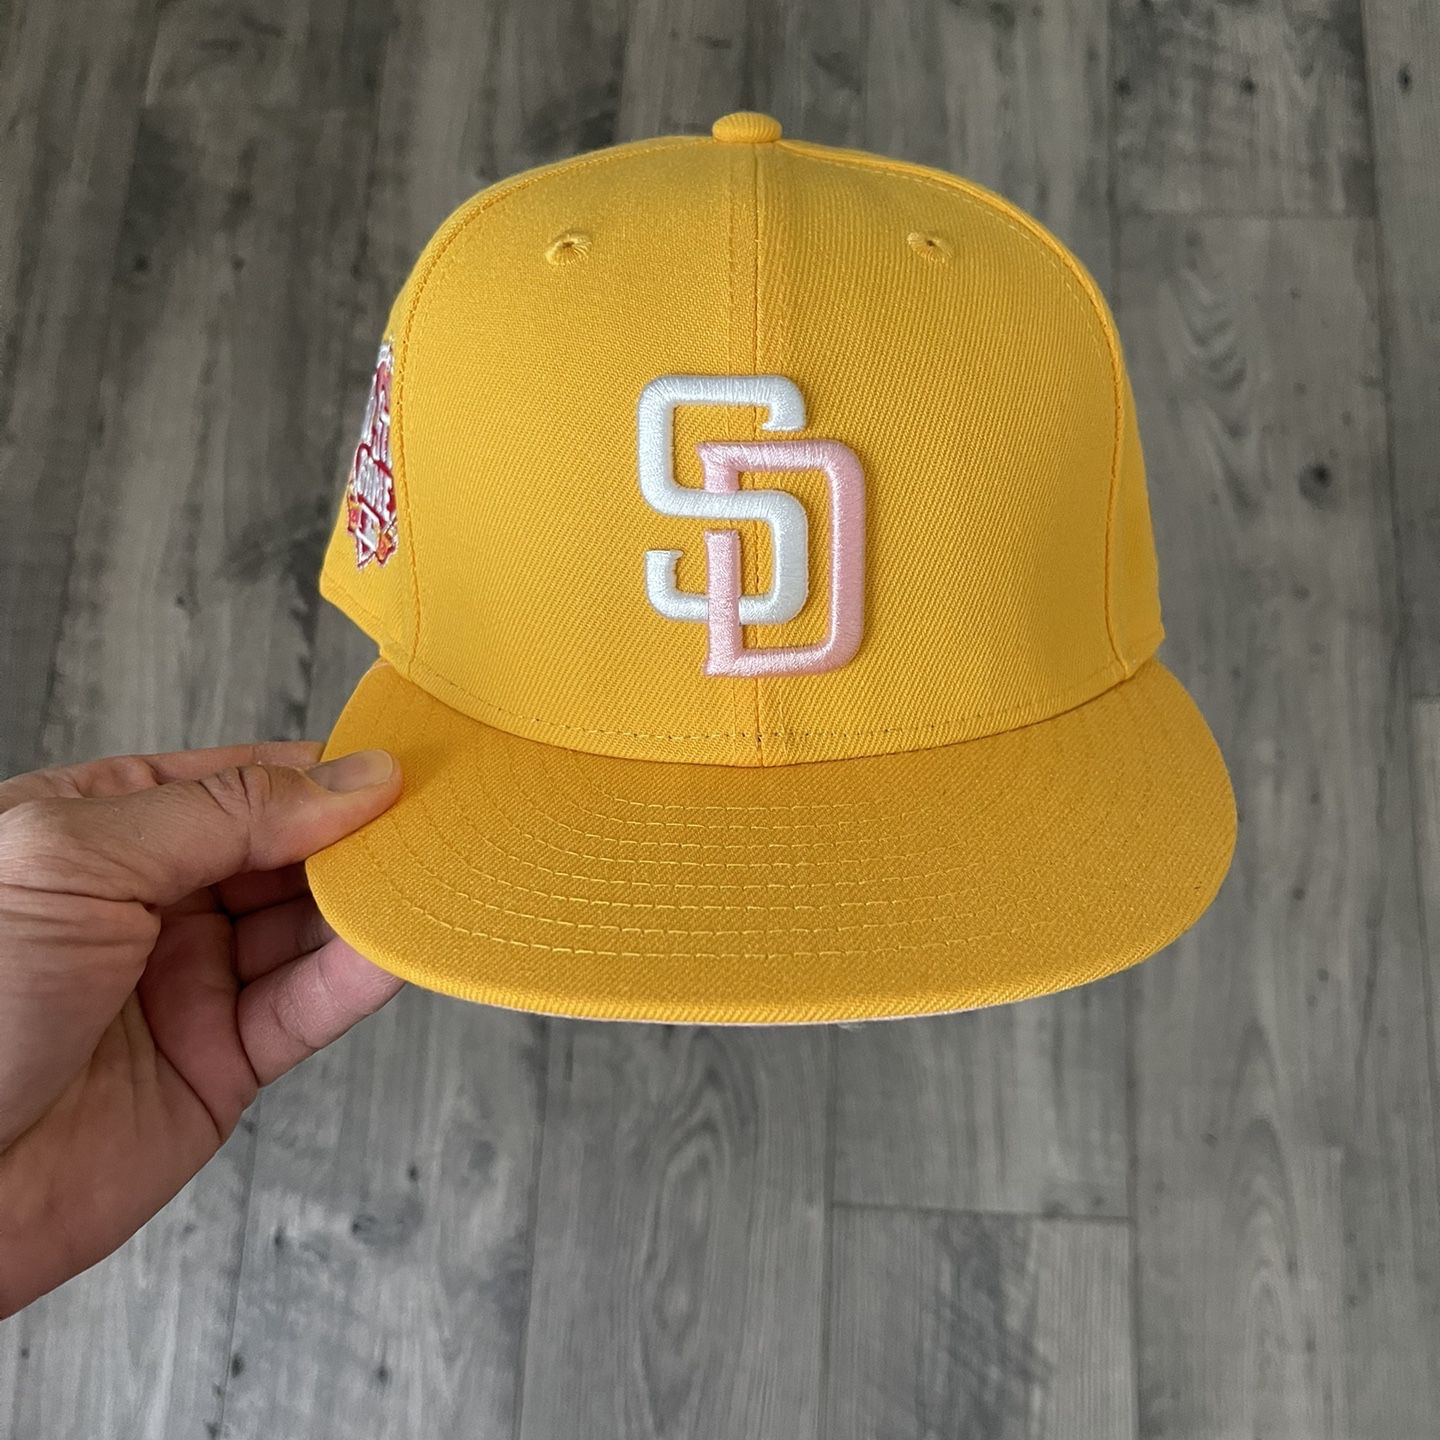 San Diego Padres City Connect Hat for Sale in San Marcos, CA - OfferUp